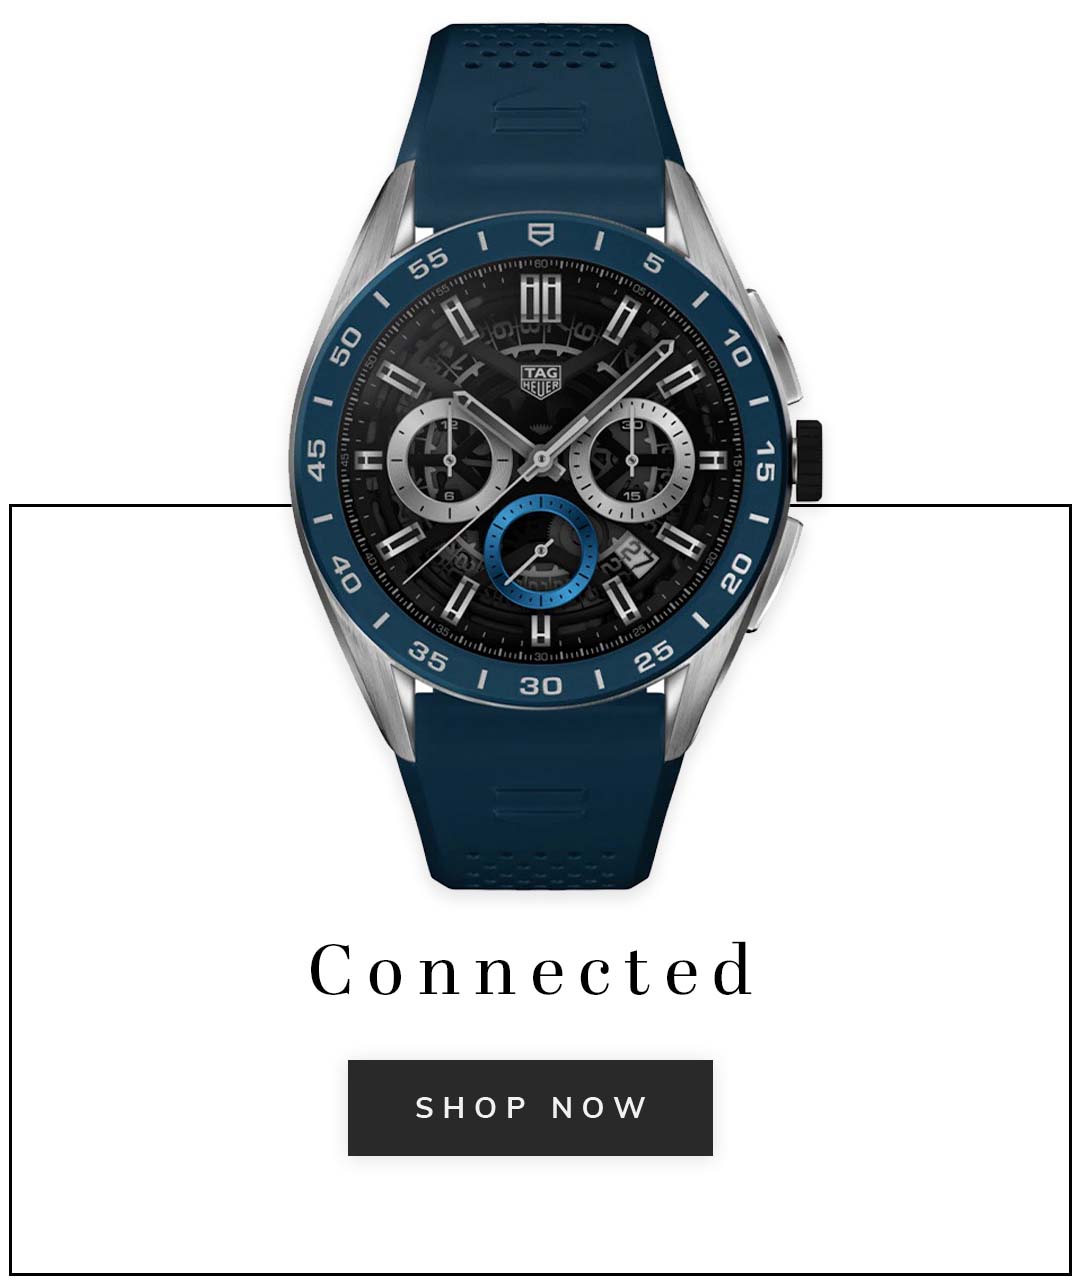 A TAG Heuer connected watch with a blue strap and caption connected shop now